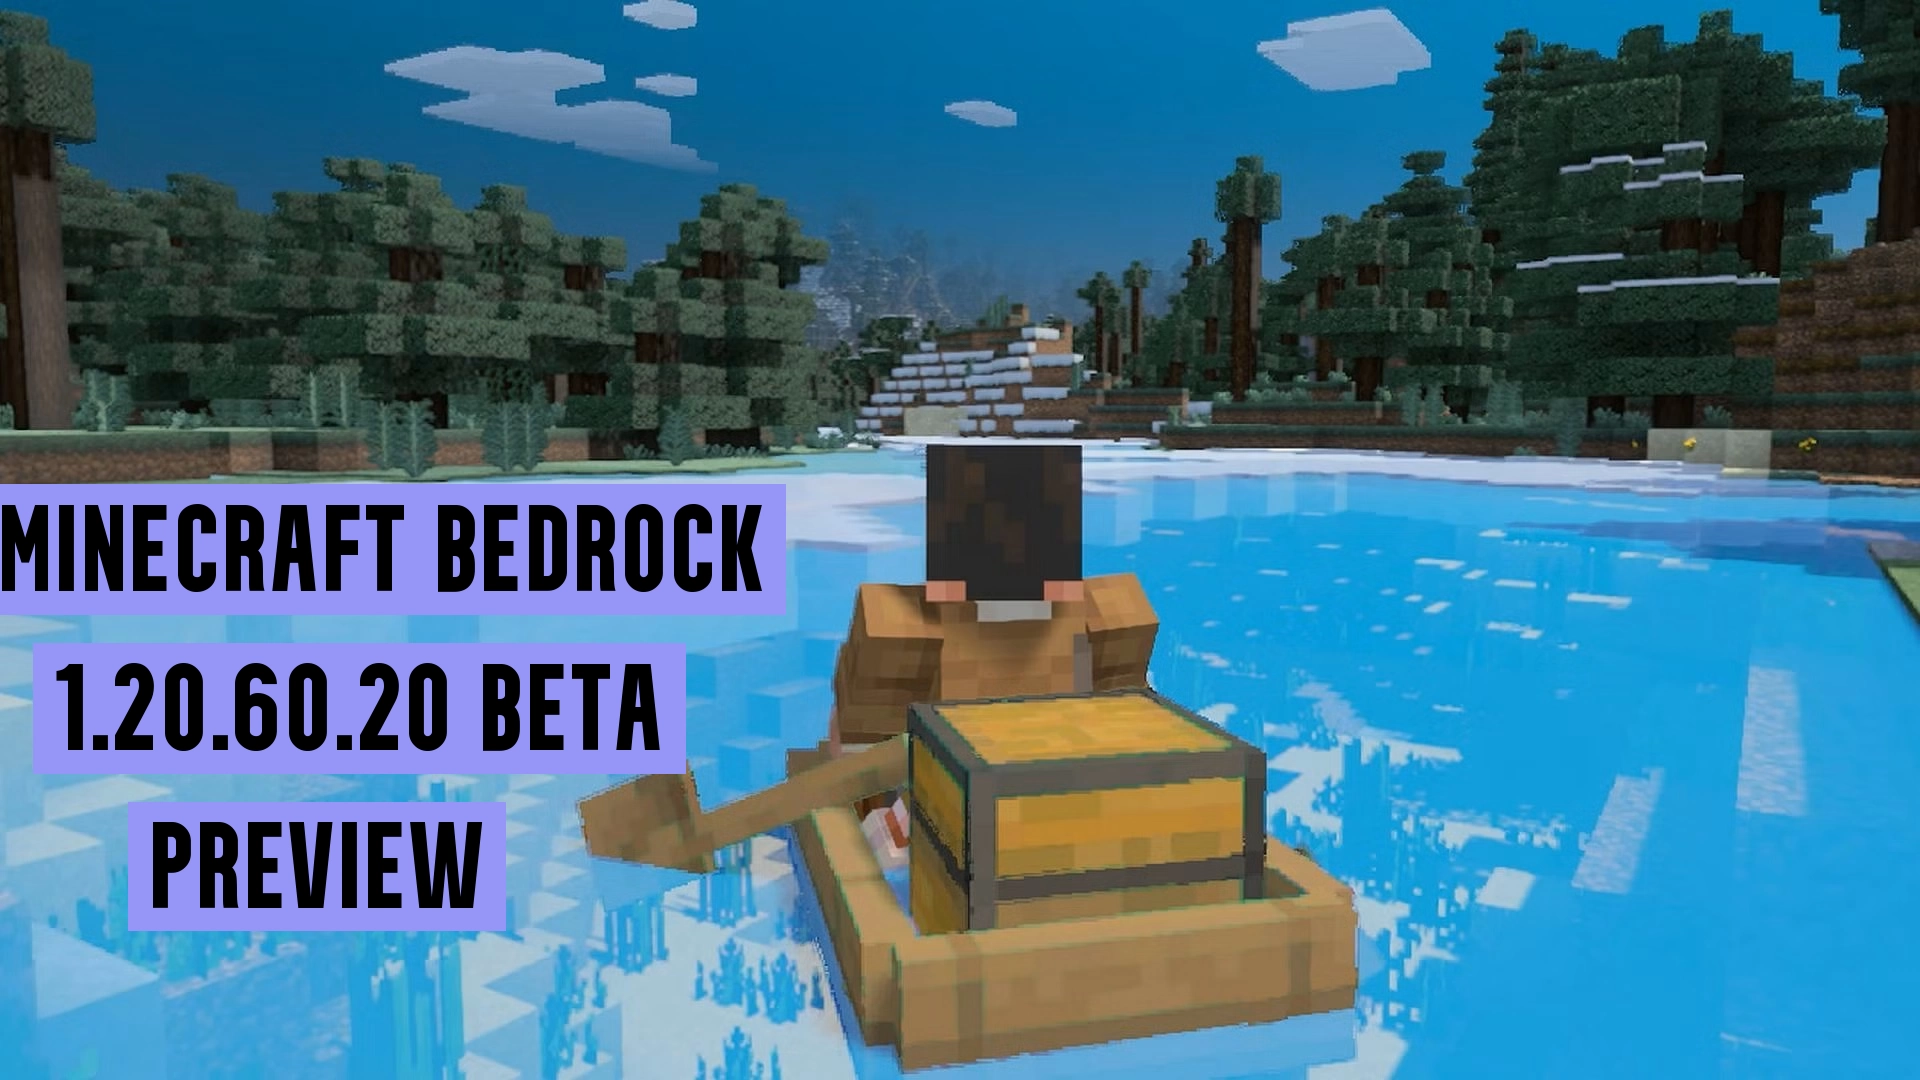 Minecraft Bedrock 1.20.60.20 Preview Patch Notes